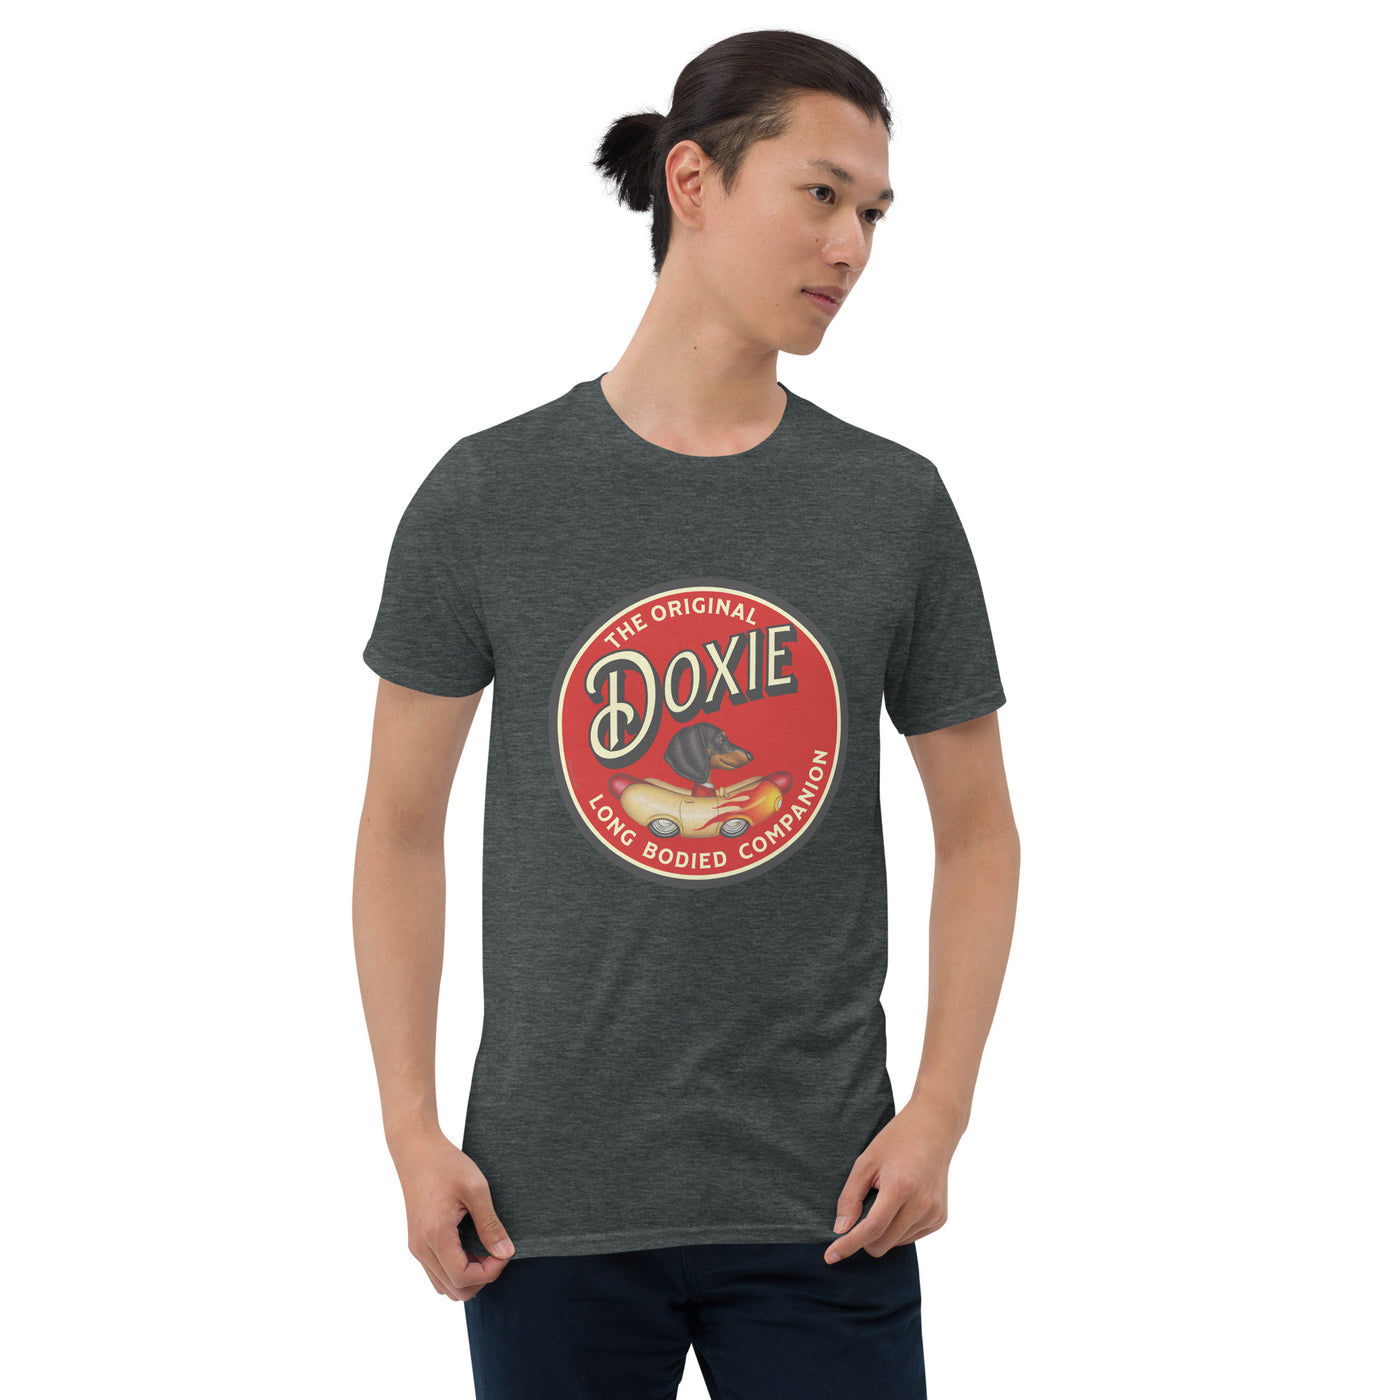 Funny and cute doxie dog in a classic low rider car on an Original Companion Dachshund Unisex T-Shirt